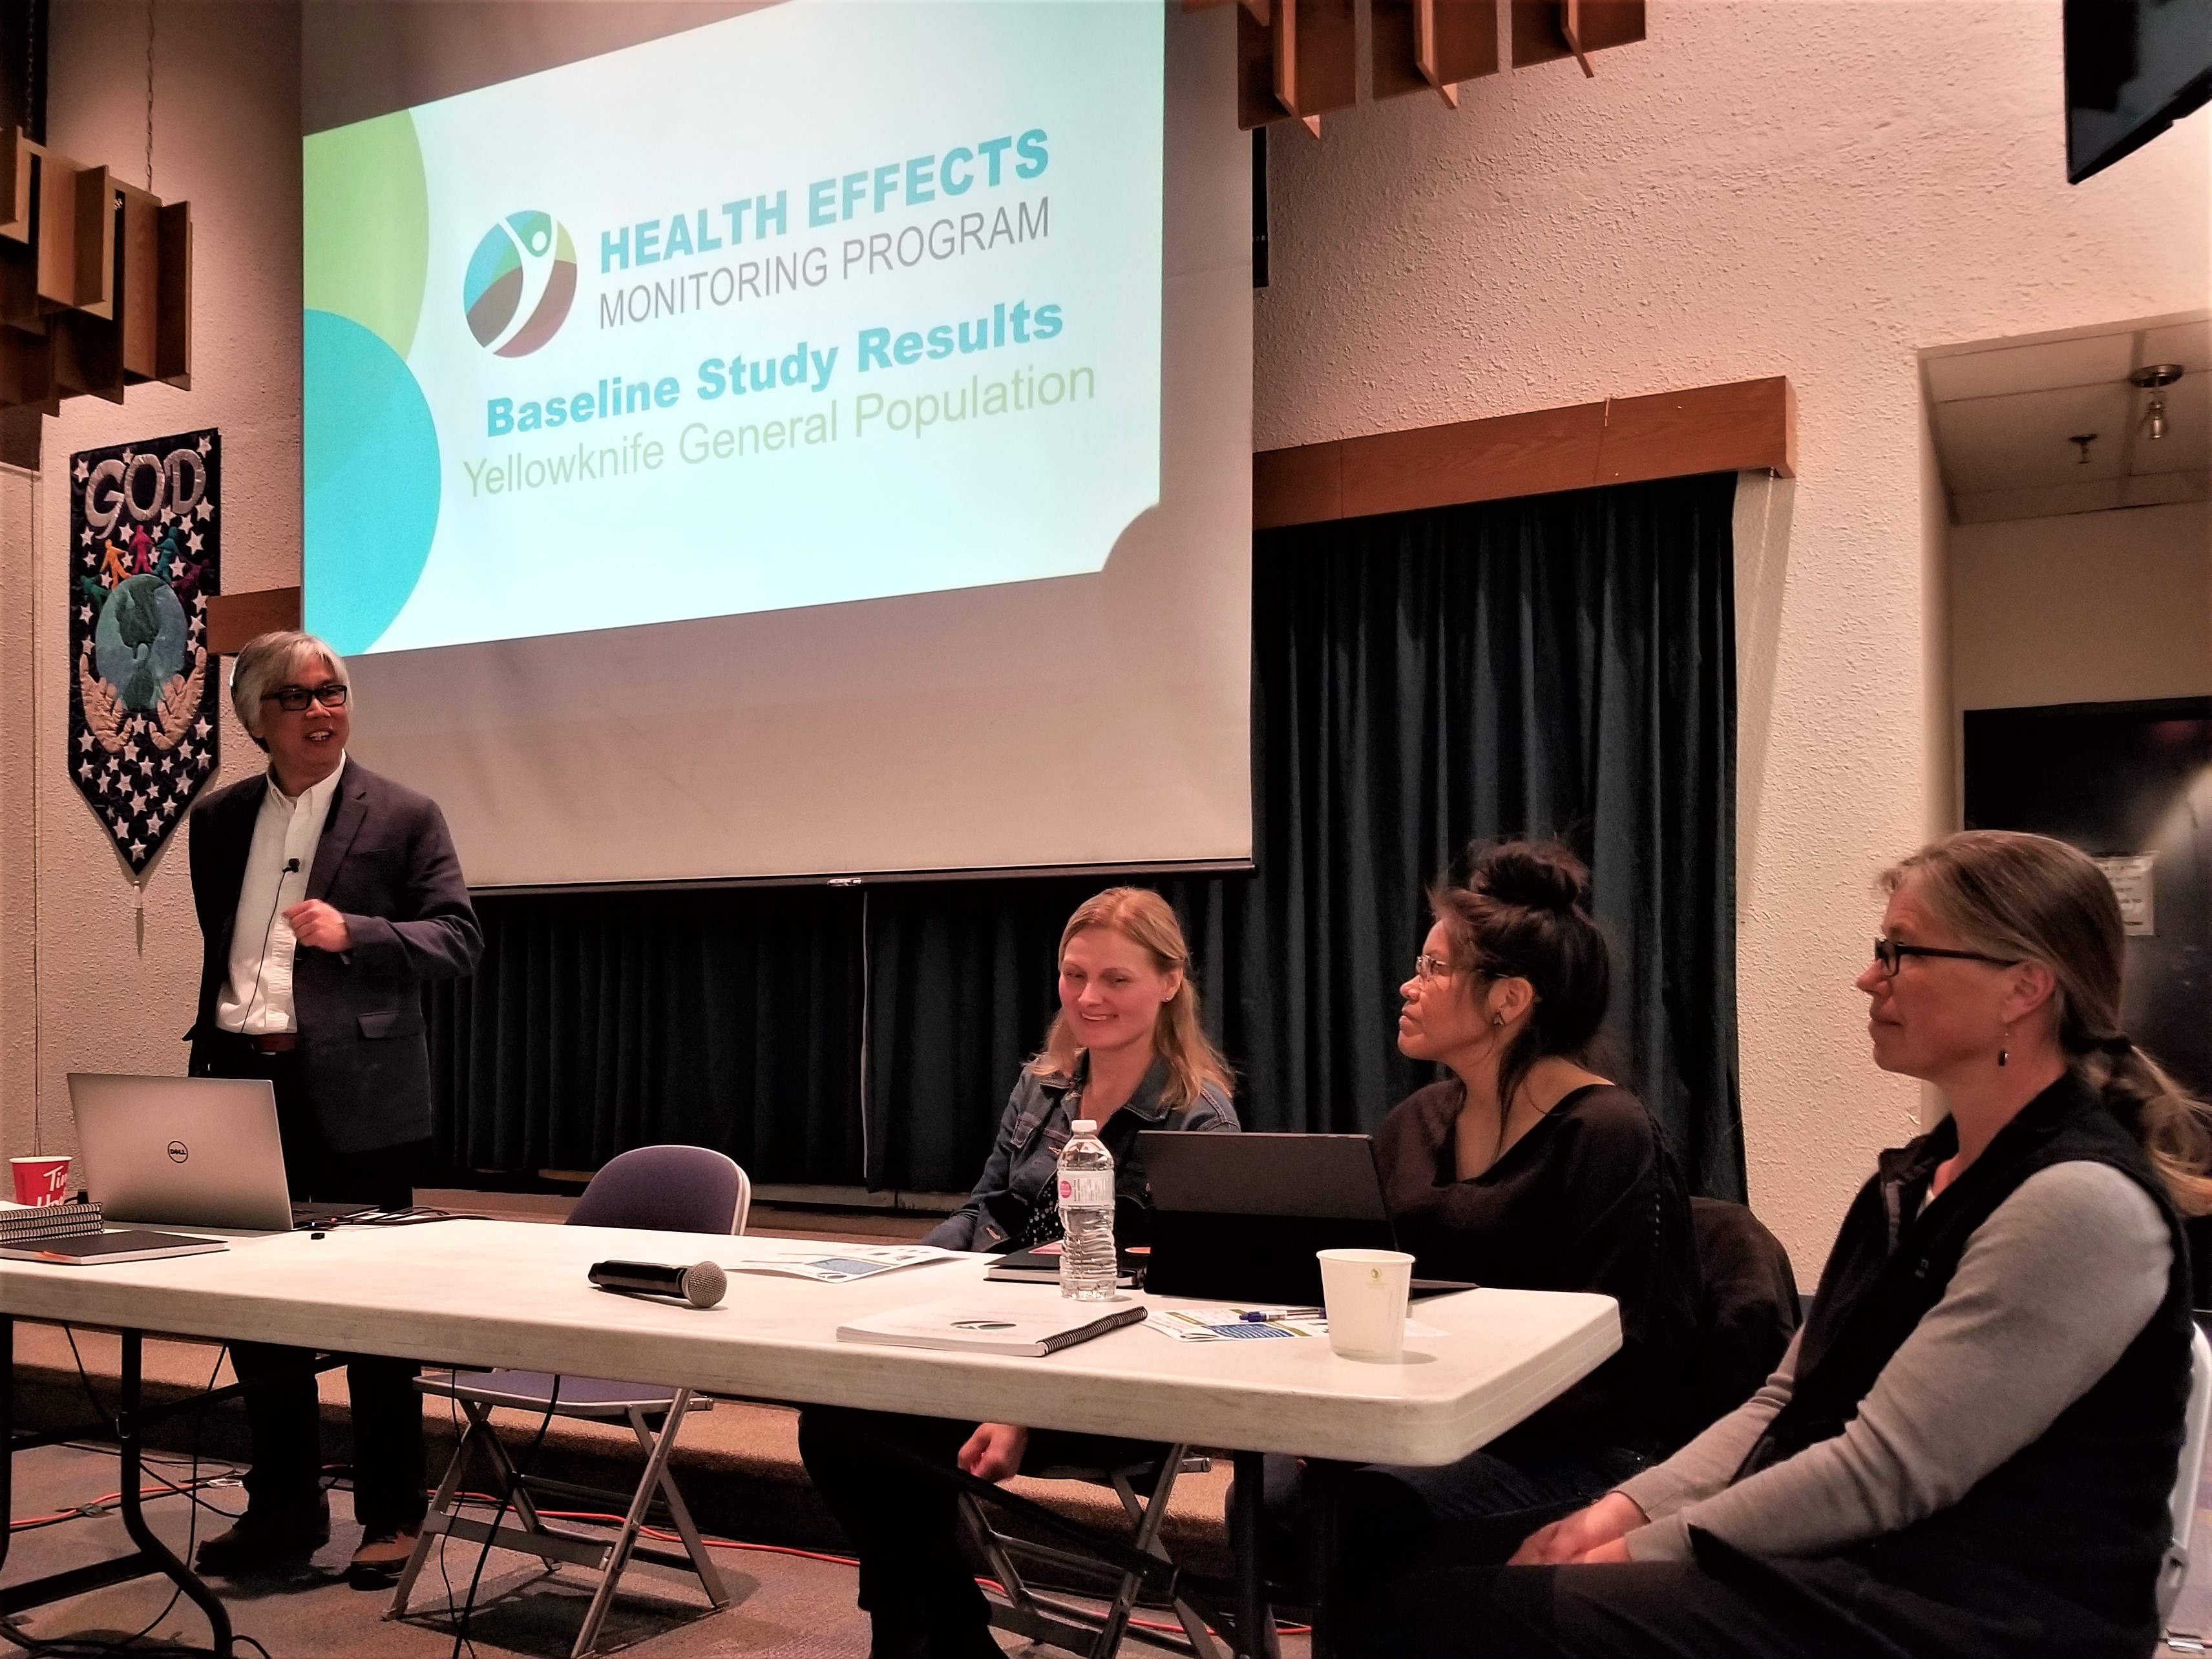 This picture shows a man standing behind a table doing a presentation. Seated to his right, at the table, are three women. Behind them, on a screen, a presentation slide reads 'Health Effects Monitoring Program, Baseline Study Results, Yellowknife General Population.'